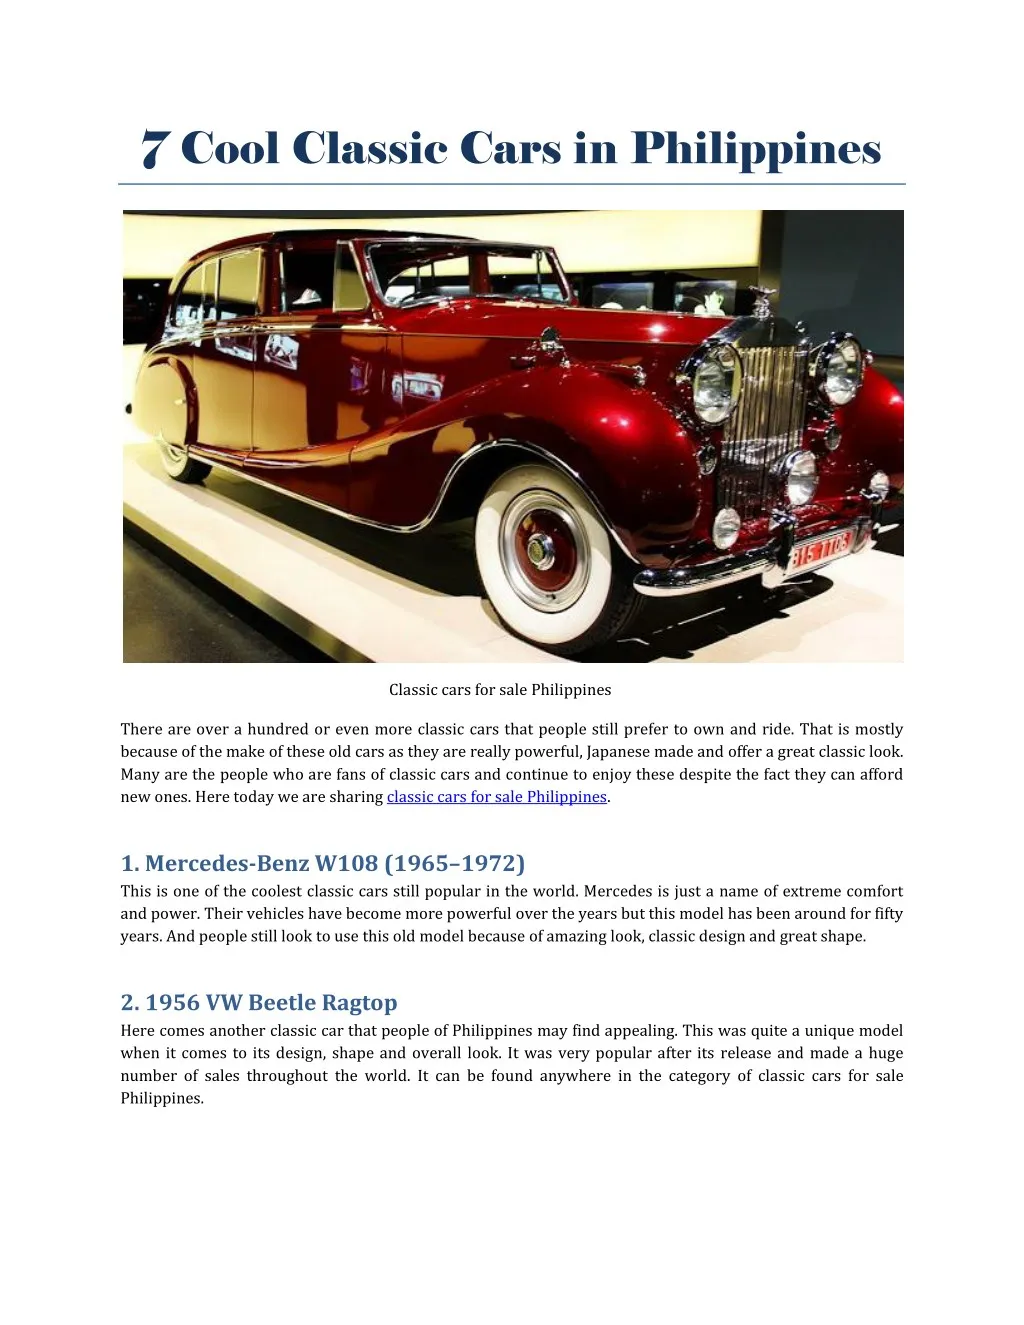 7 cool classic cars in philippines